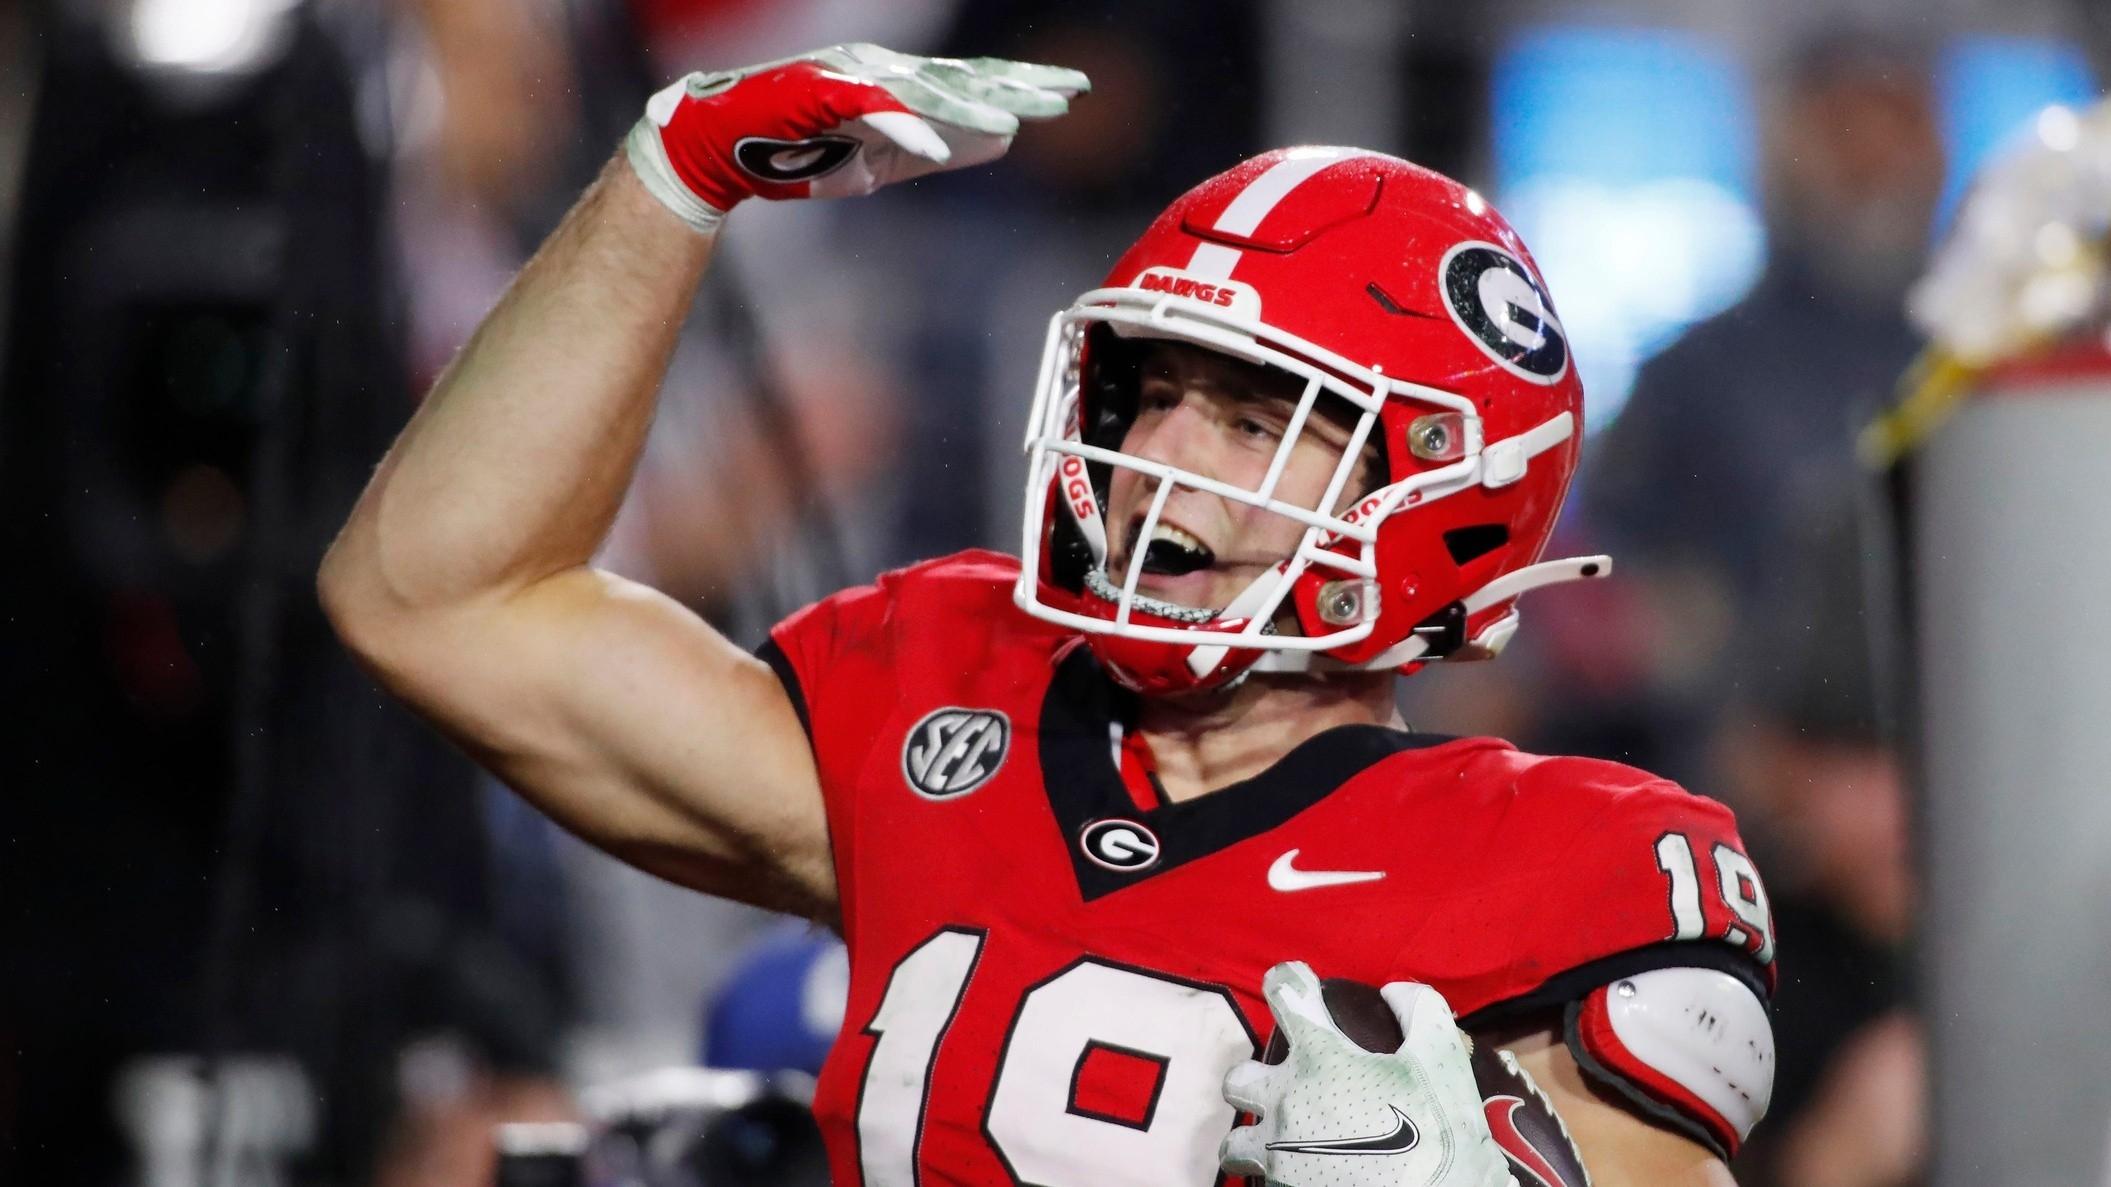 Georgia tight end Brock Bowers (19) celebrates after scoring a touchdown during the second half of a NCAA college football game against Ole Miss. / Joshua L. Jones / USA TODAY NETWORK